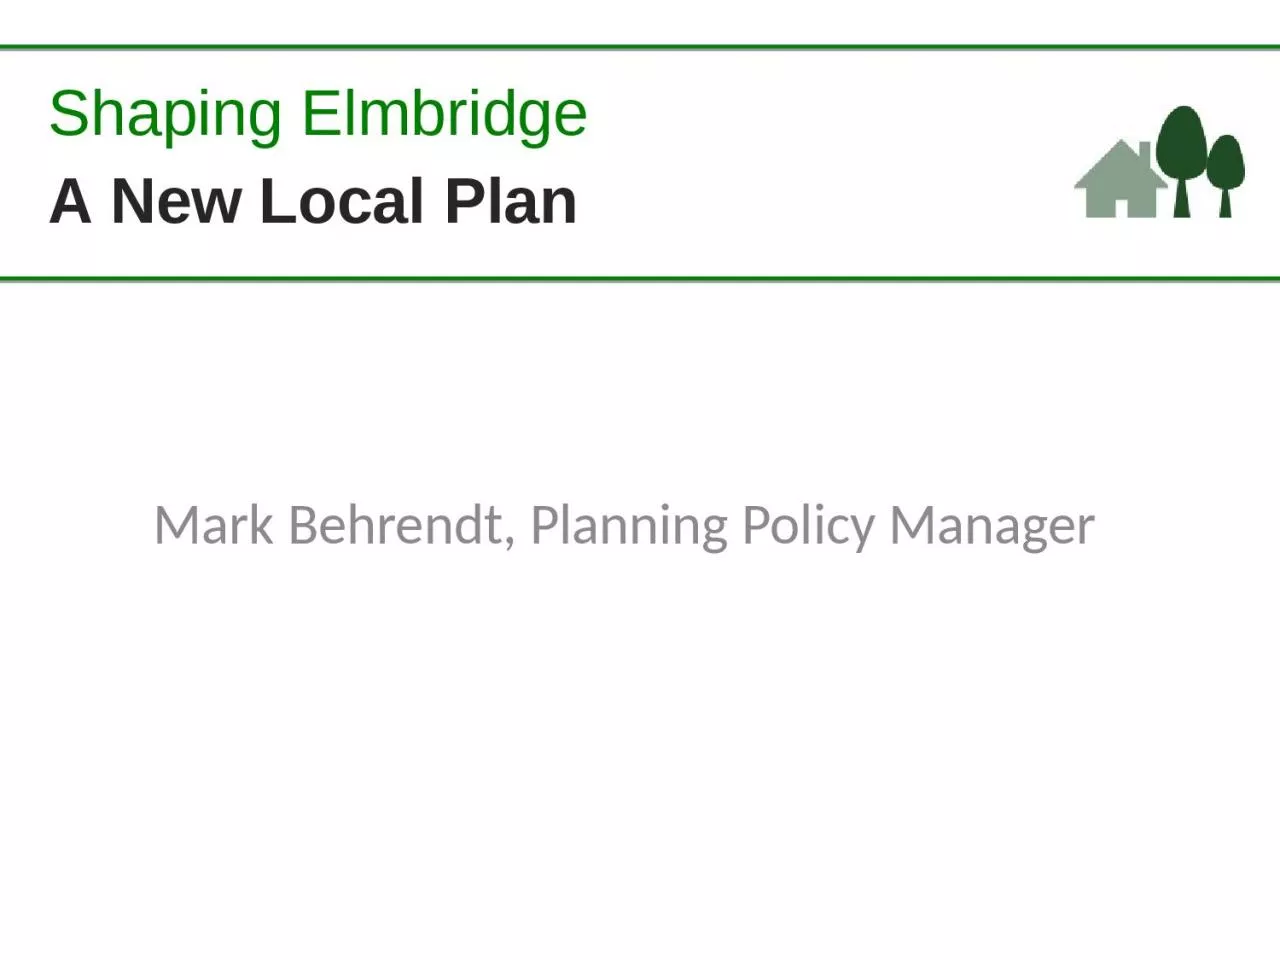 Mark Behrendt, Planning Policy Manager